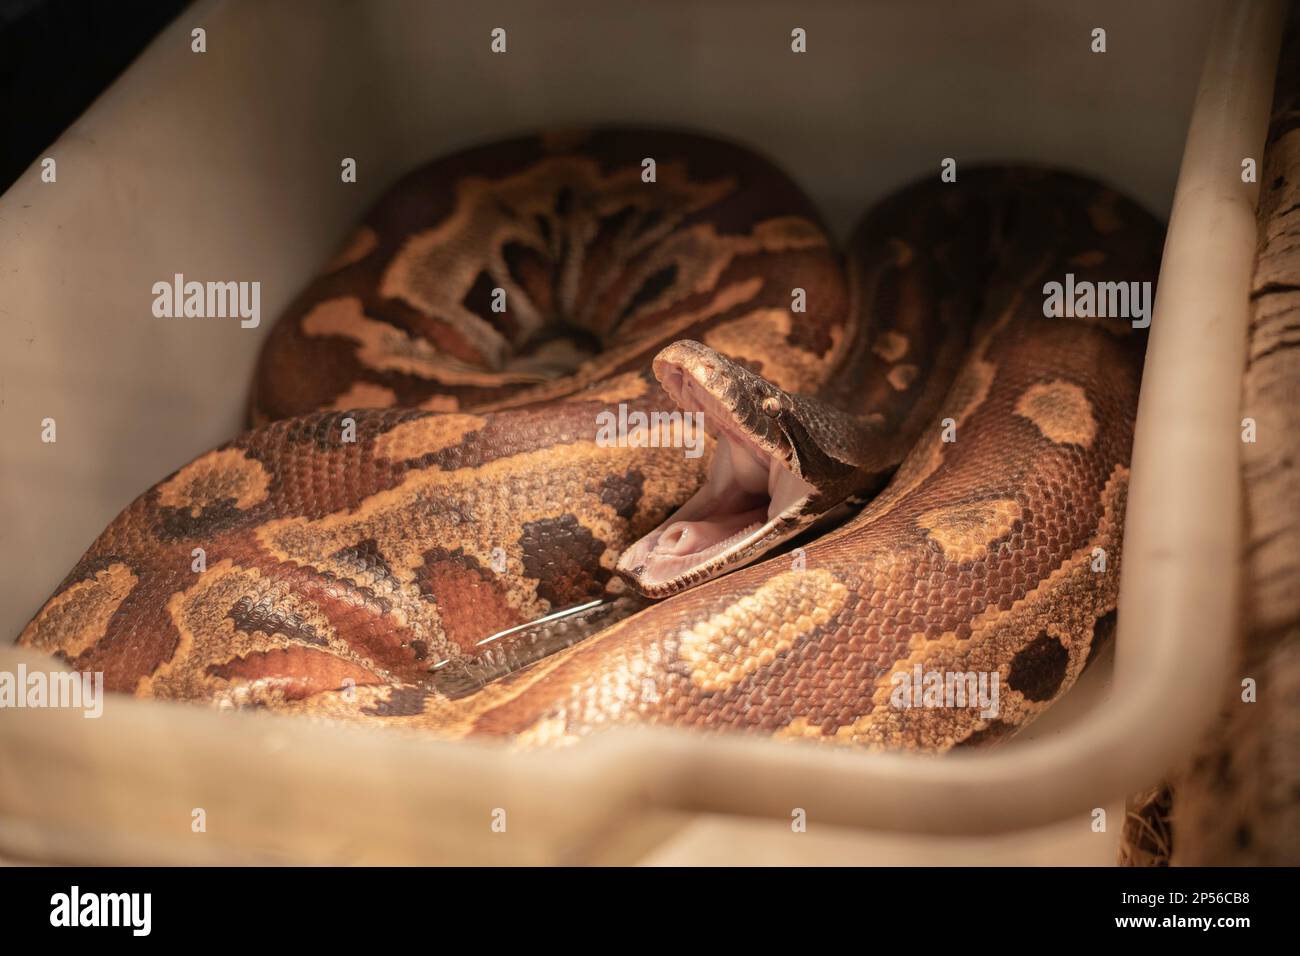 Reticulated python yawning in a bin, exposing its glottis. Stock Photo